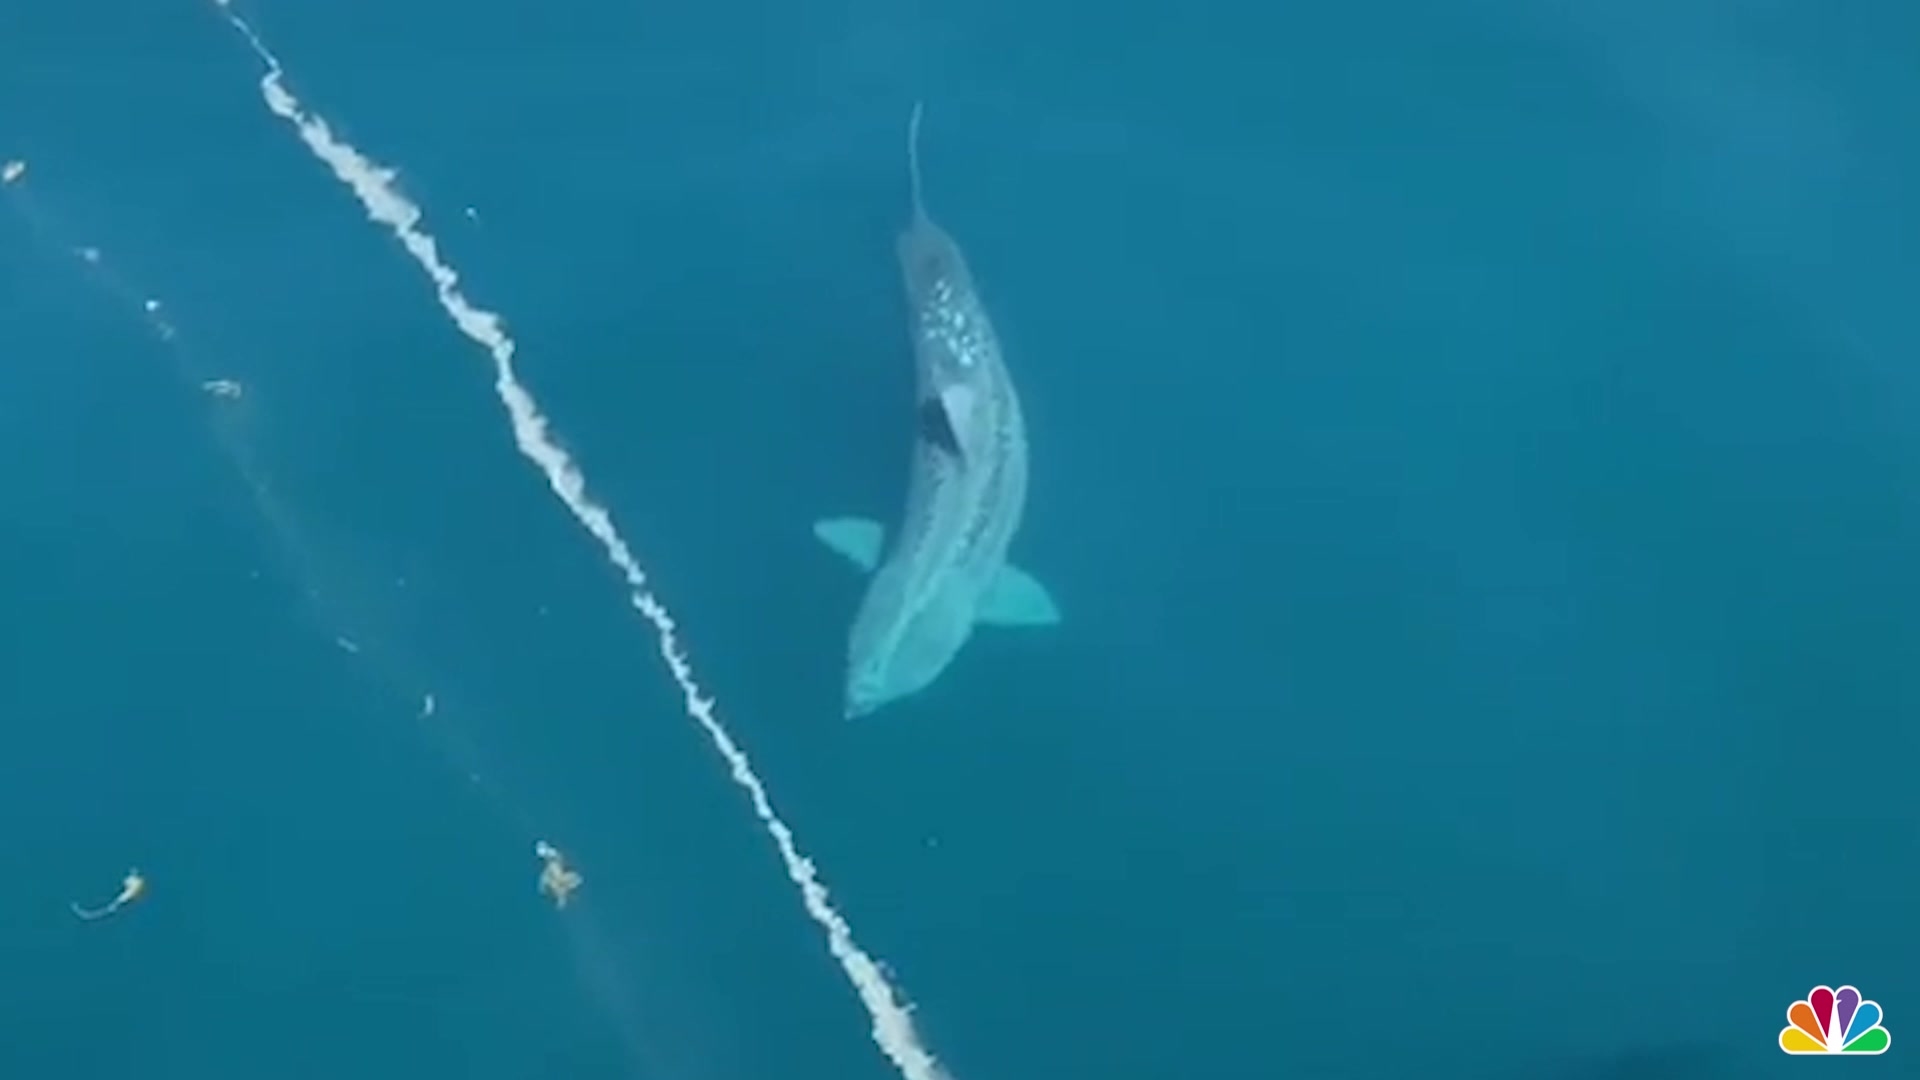 A nearly 3,000-pound 'giant' shark was tagged by a Cape Cod researcher: 'We  hit the lottery